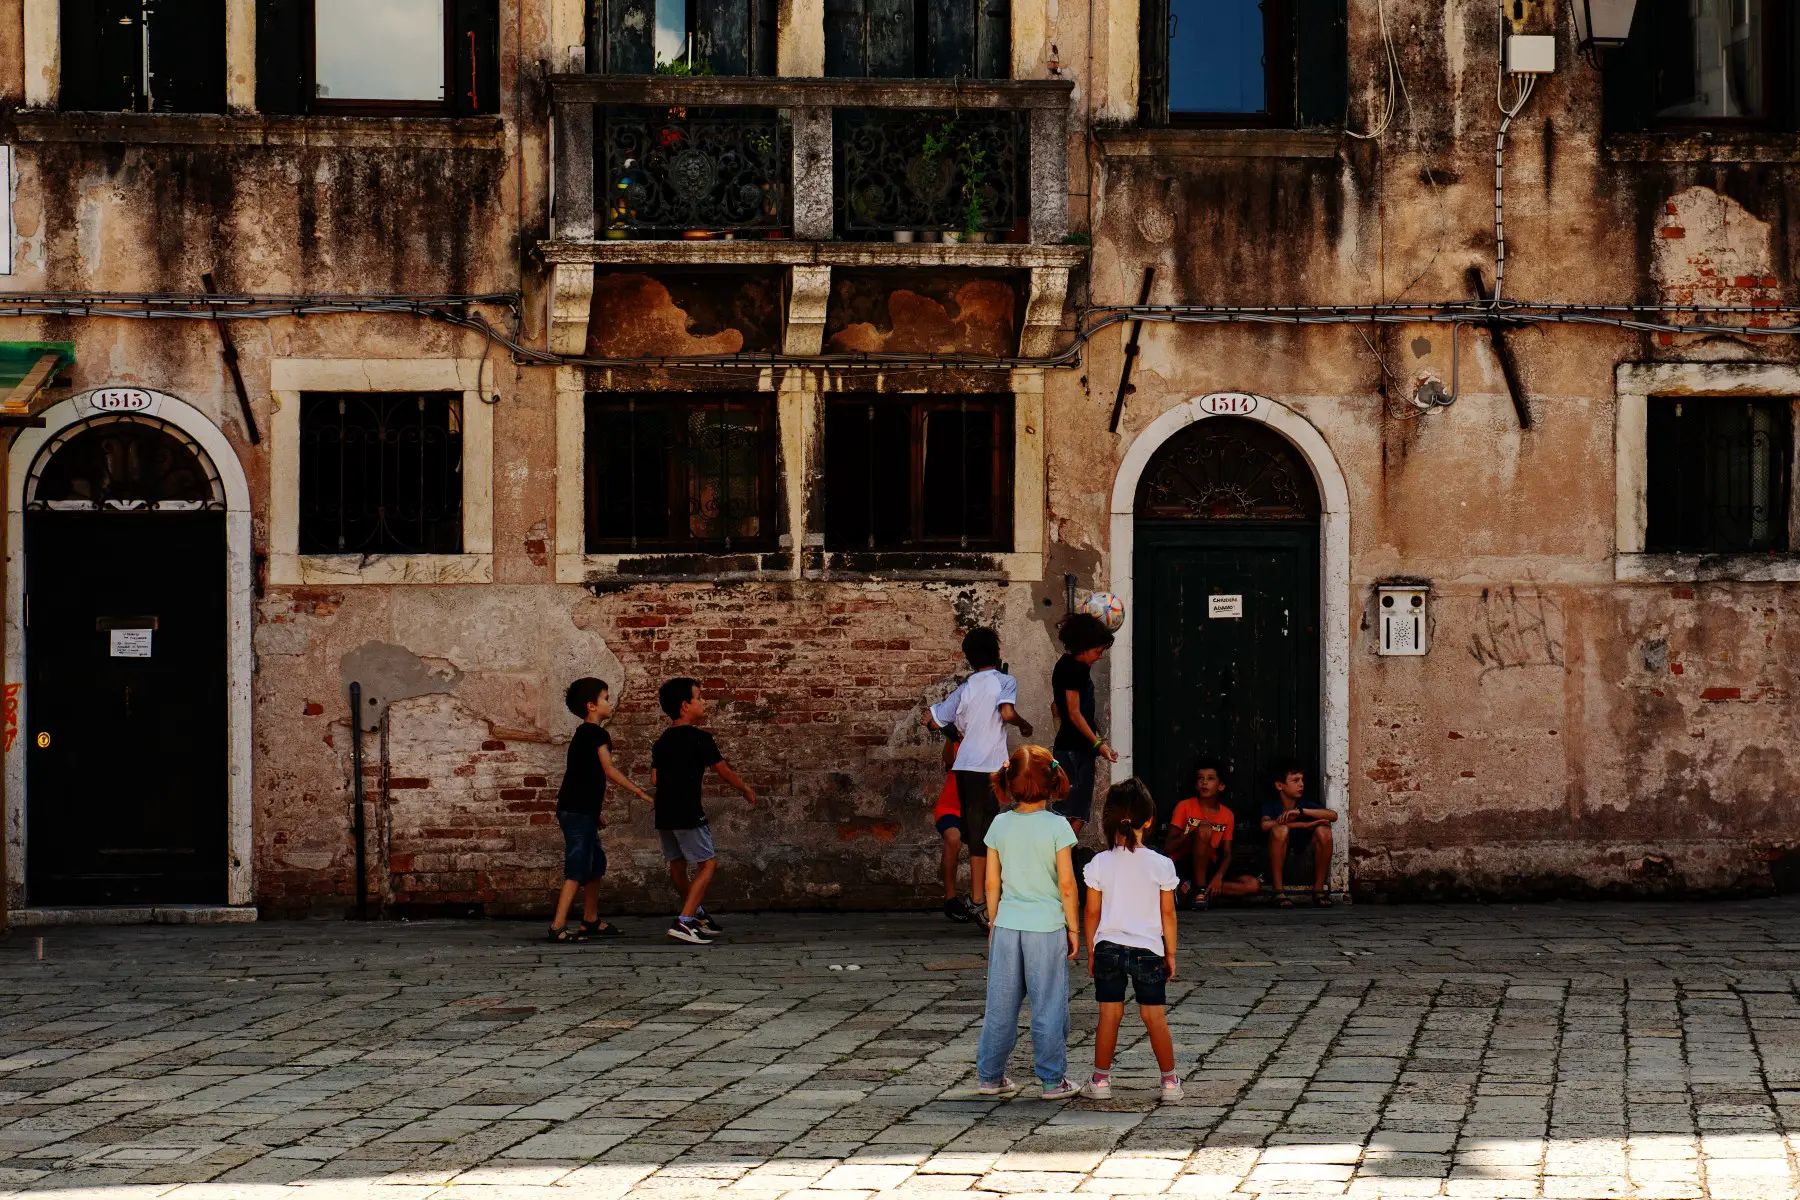 A group of children playing football (soccer) in the shade in a city square in Venice, Italy